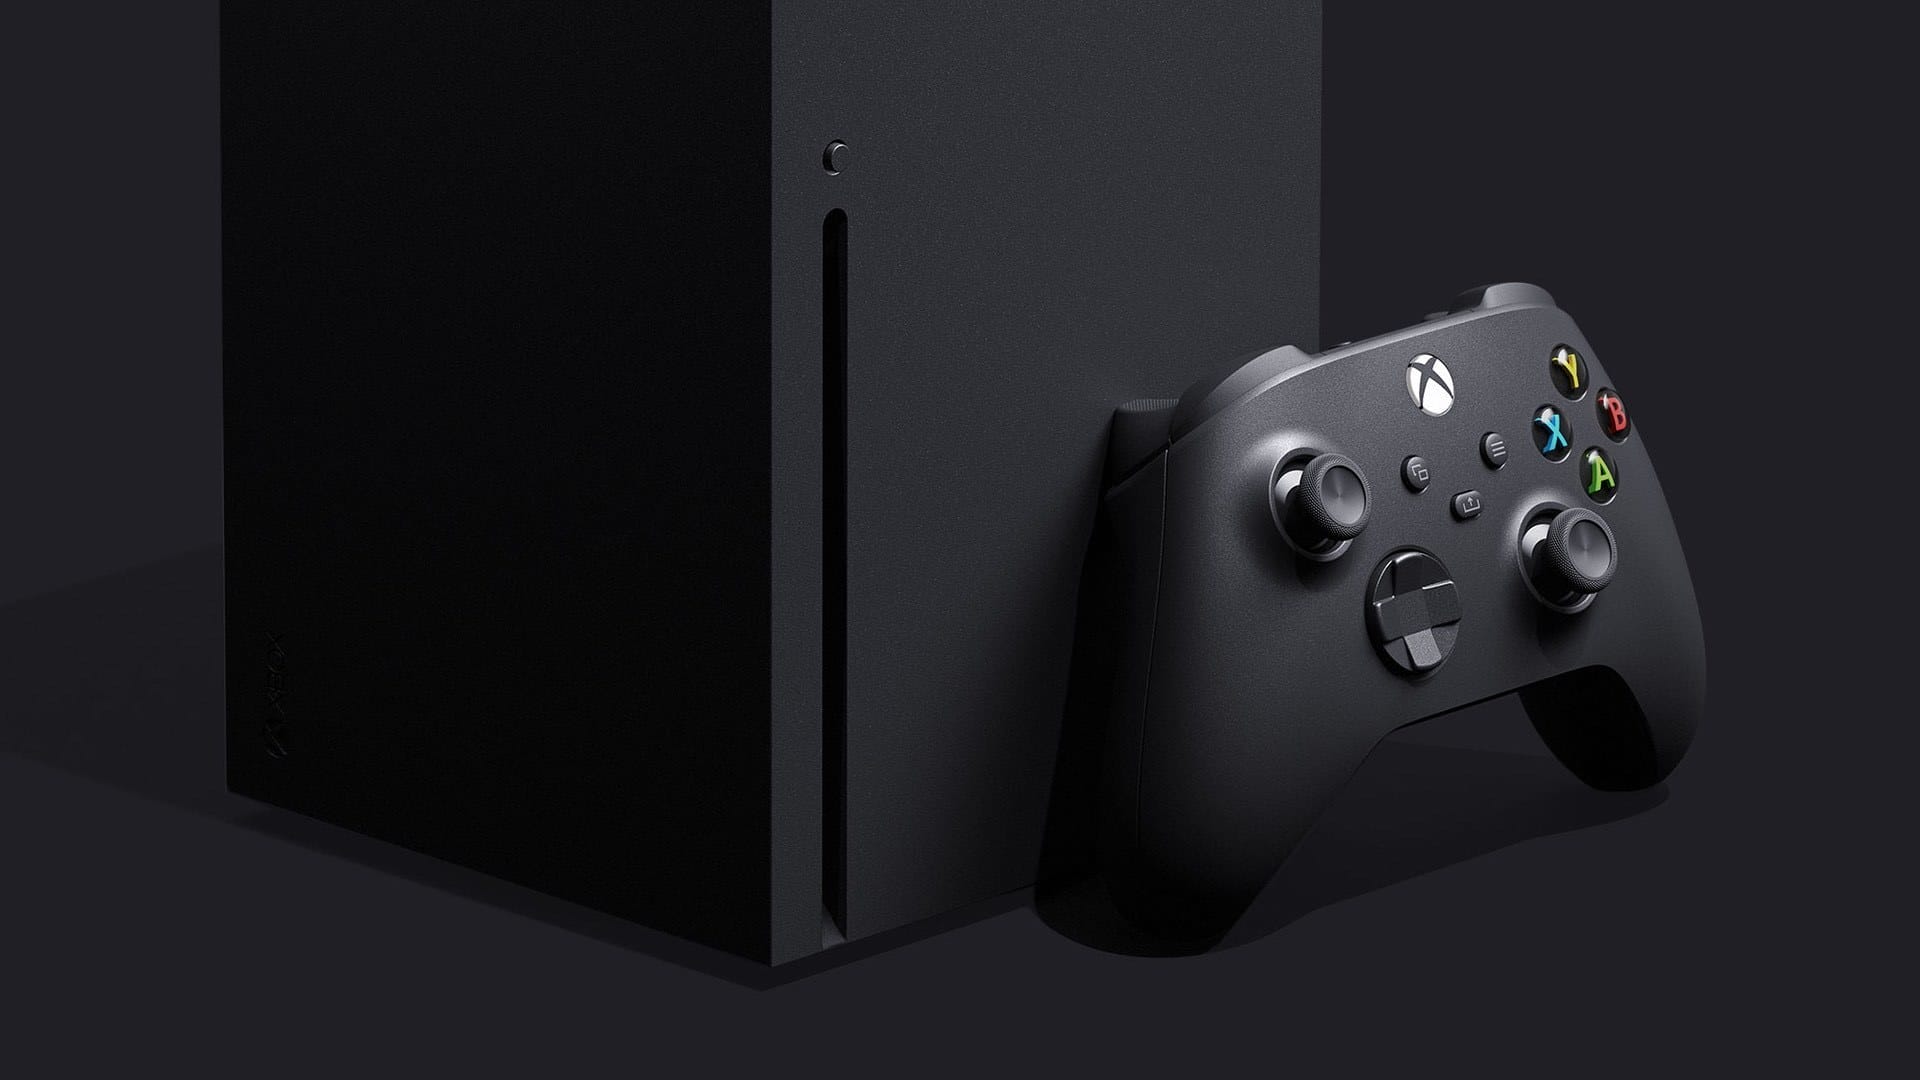 Rumor : Xbox Series X June Event Will Focus More on the Console